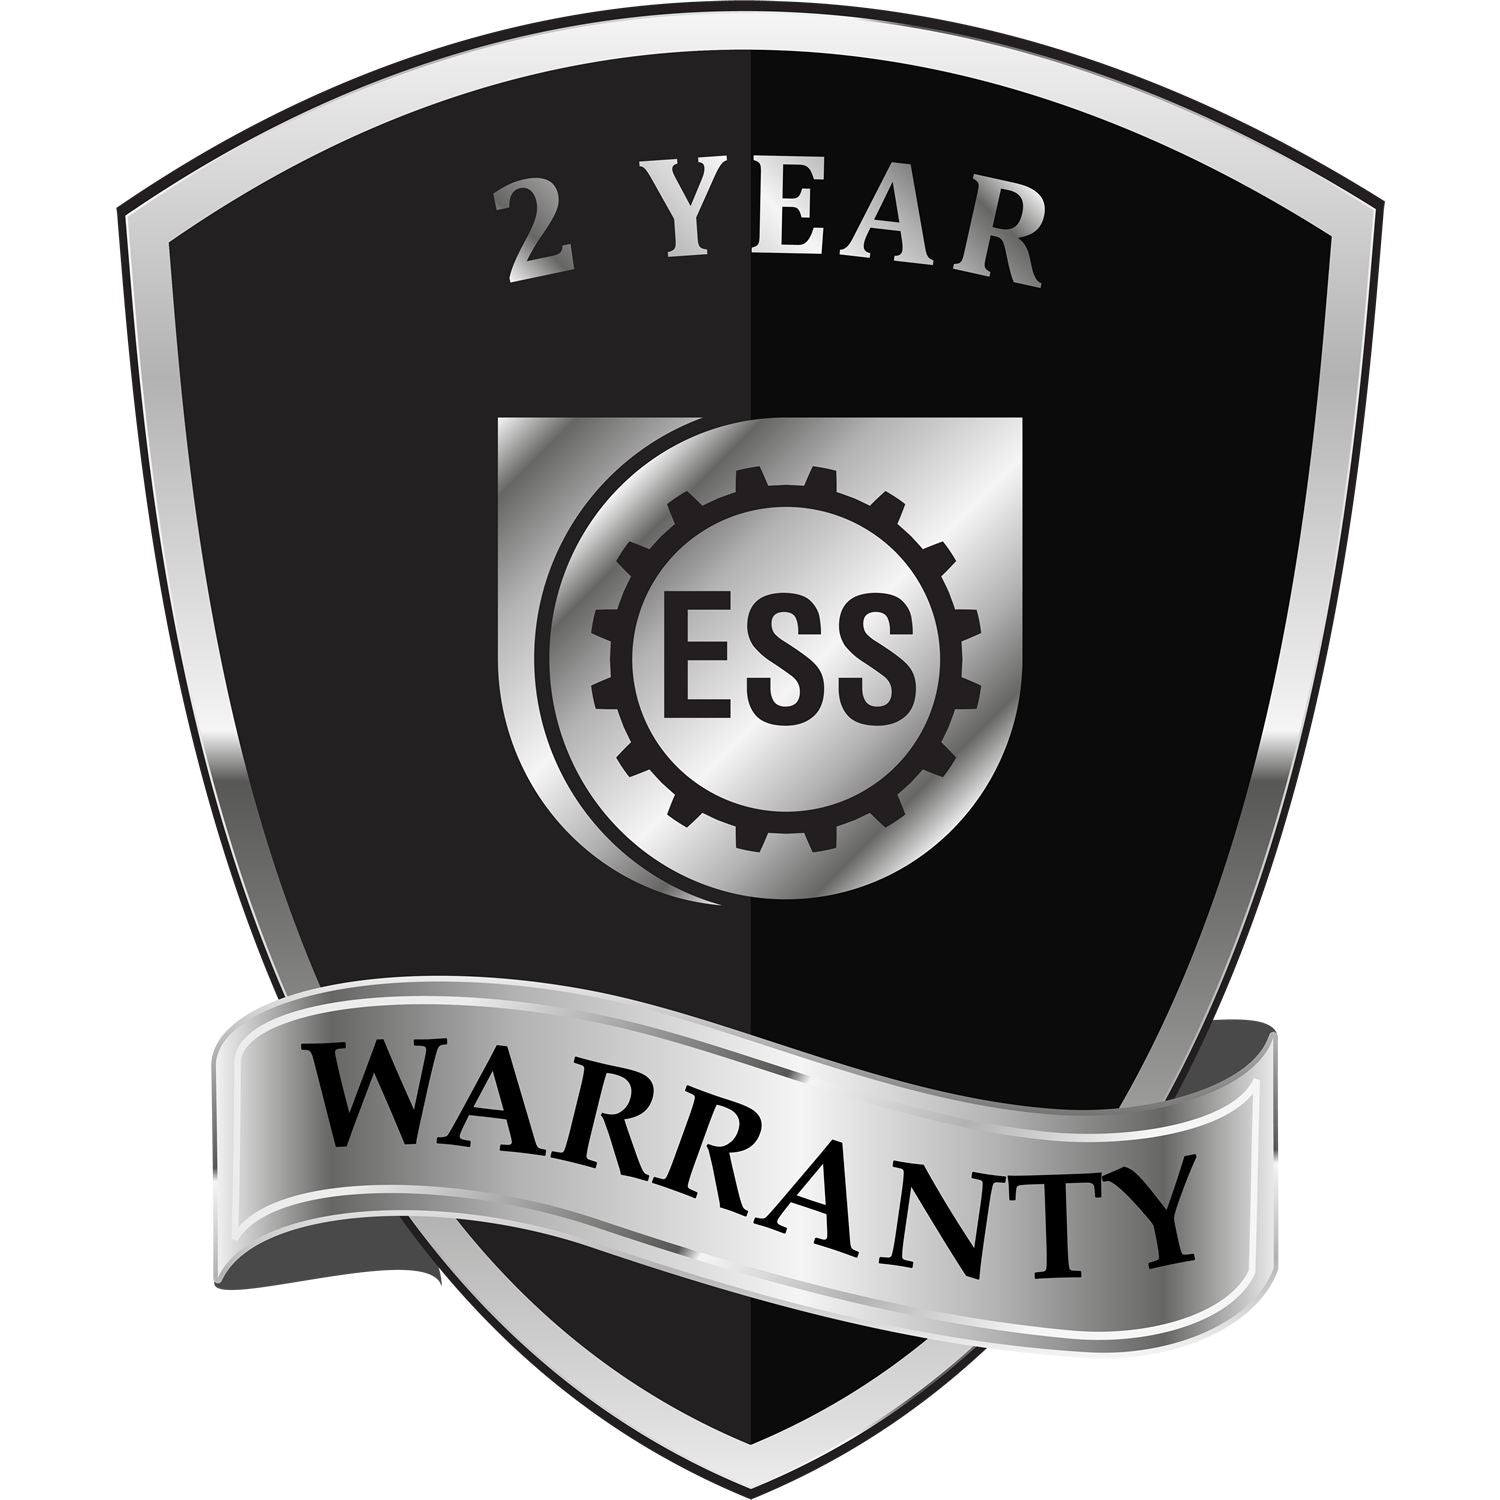 A badge or emblem showing a warranty icon for the Puerto Rico Engineer Desk Seal